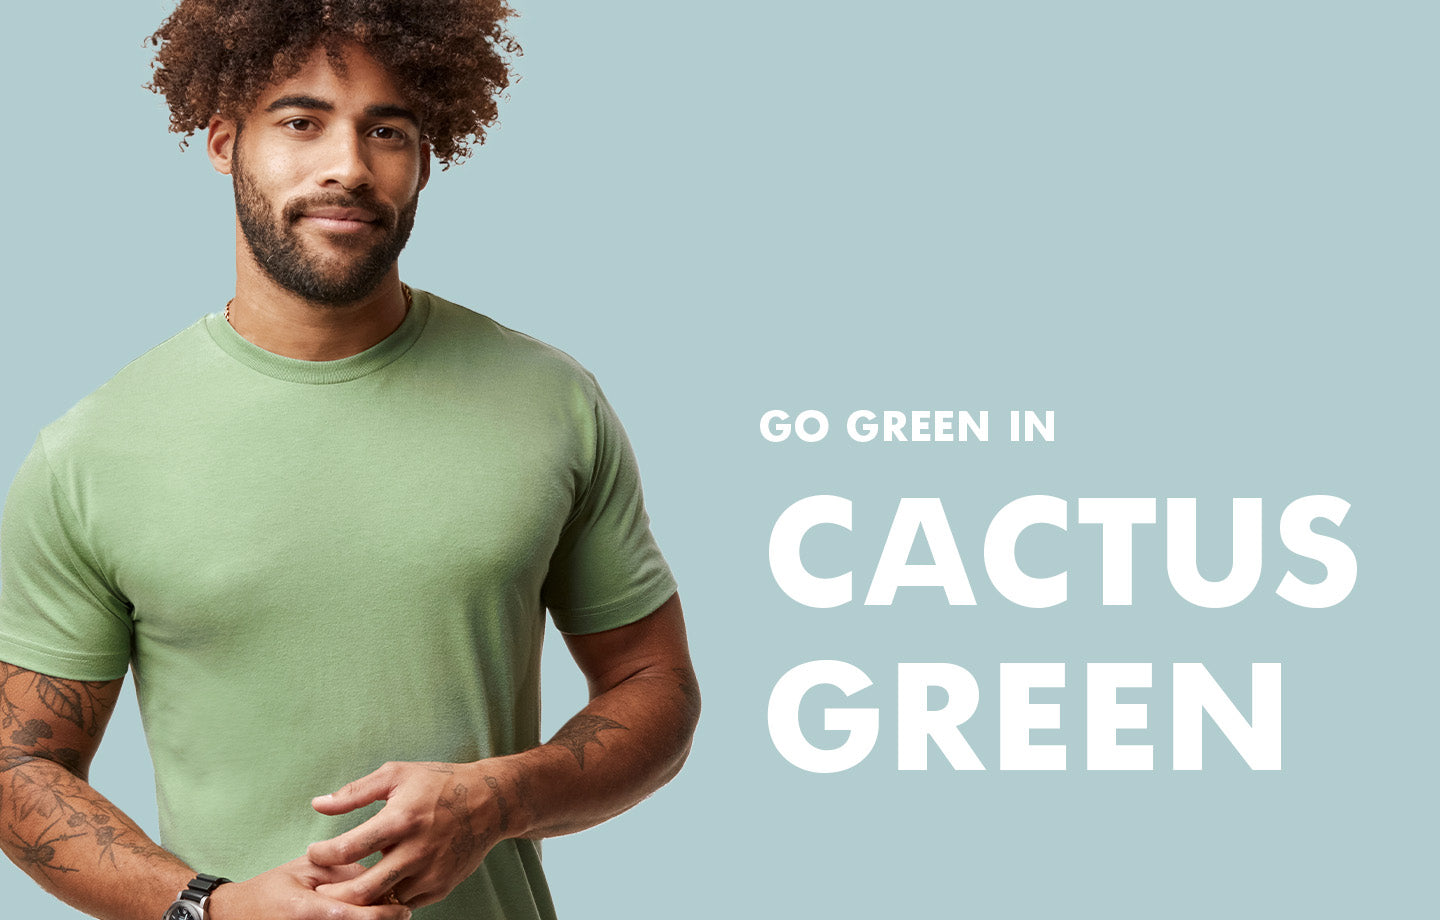 New Spring Colors | Introducing Cactus Green | Fresh Clean Threads